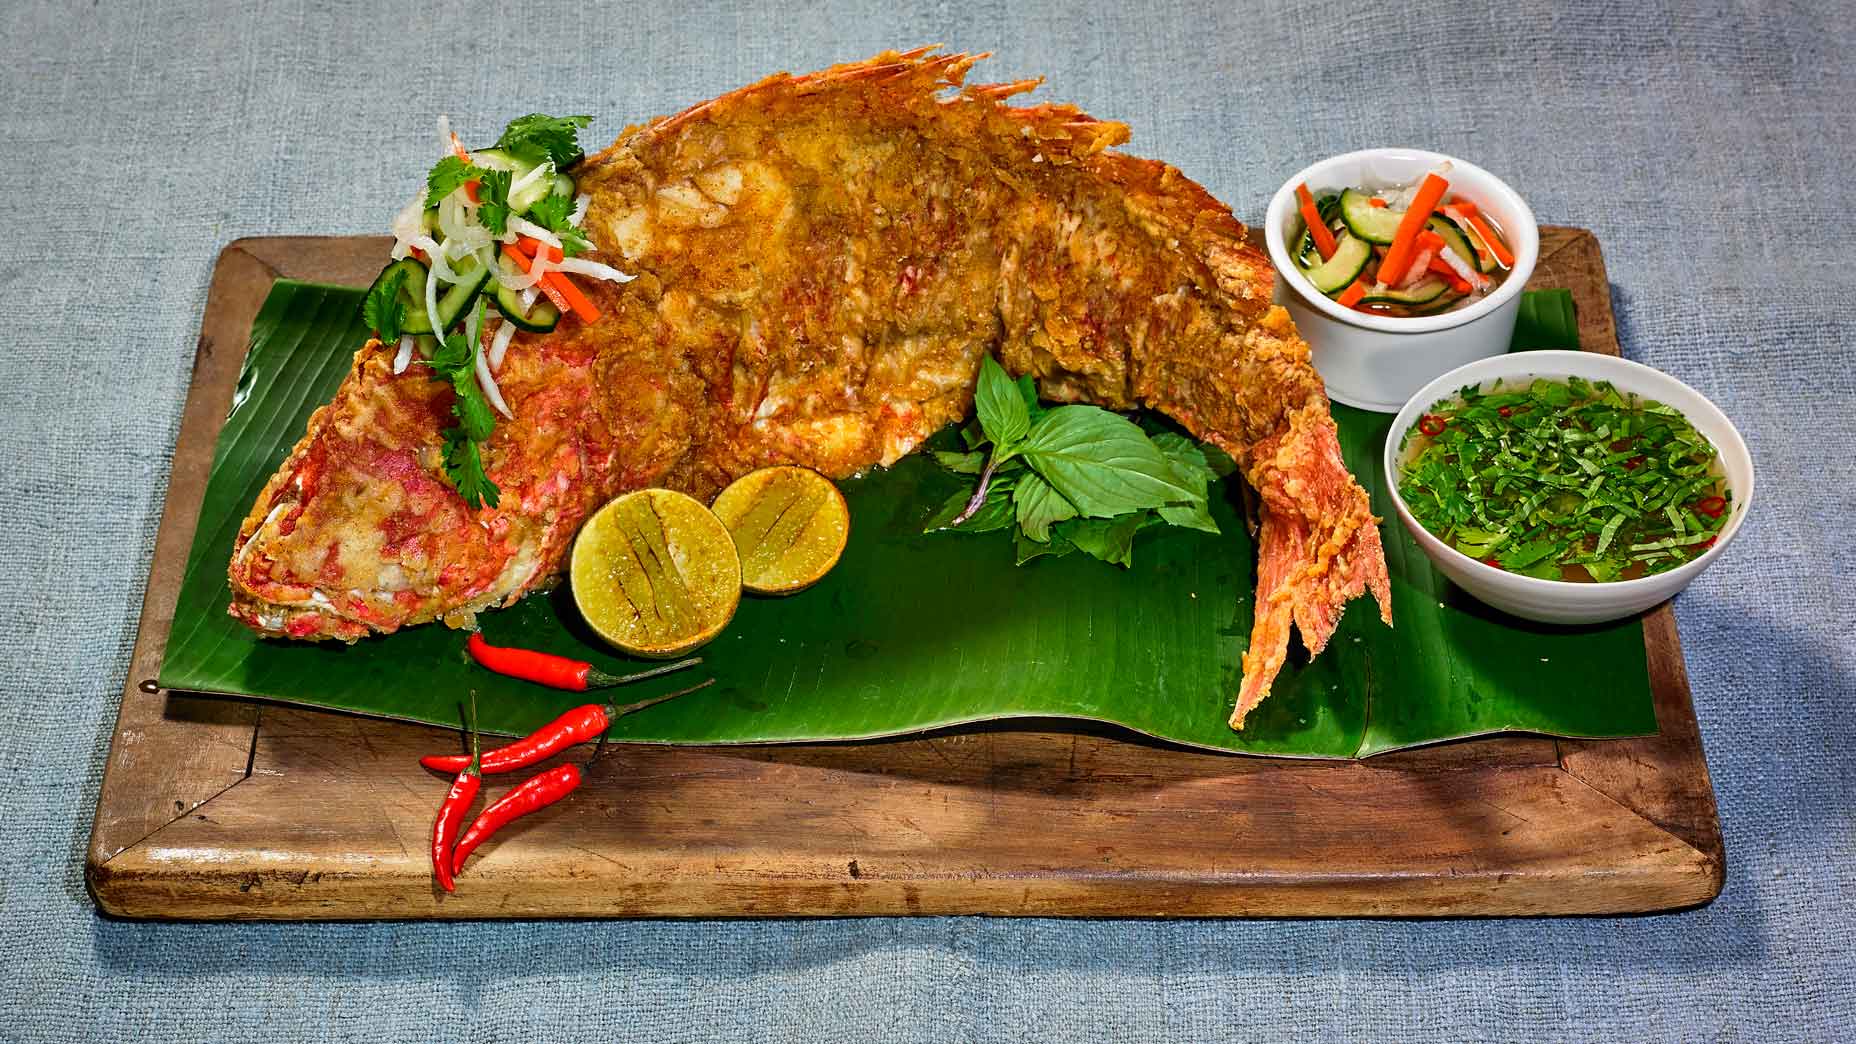 The whole fried snapper at Kauai's Hokuala resort is a feast for the senses